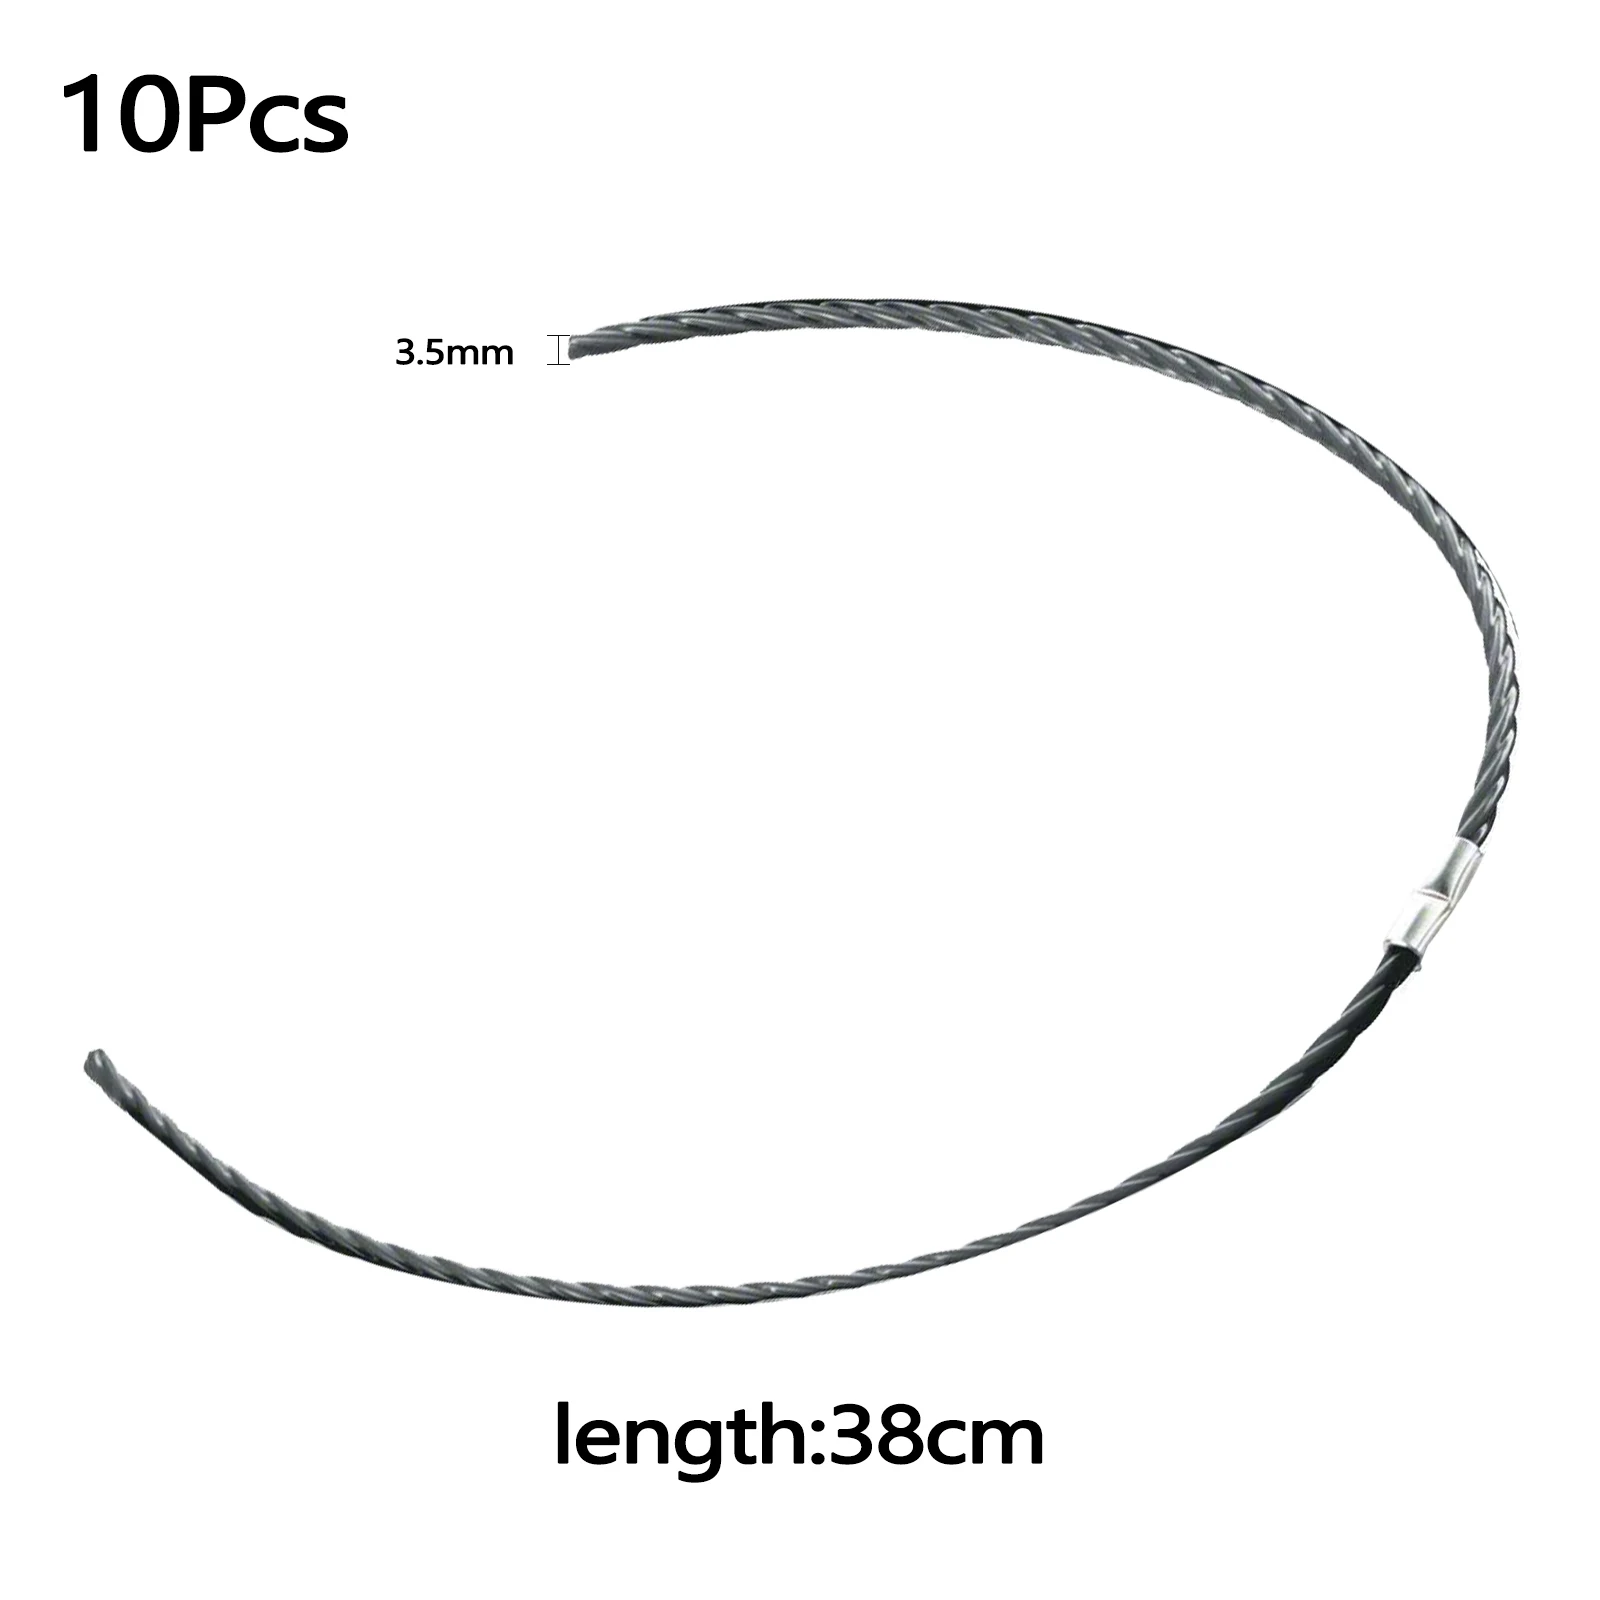 

10 Pcs Trimmer Lines 3.5mm 39cm Spare Parts For Bosch F016800431 AFS 23-37 Grass Trimmer Lawn Mower Accessories